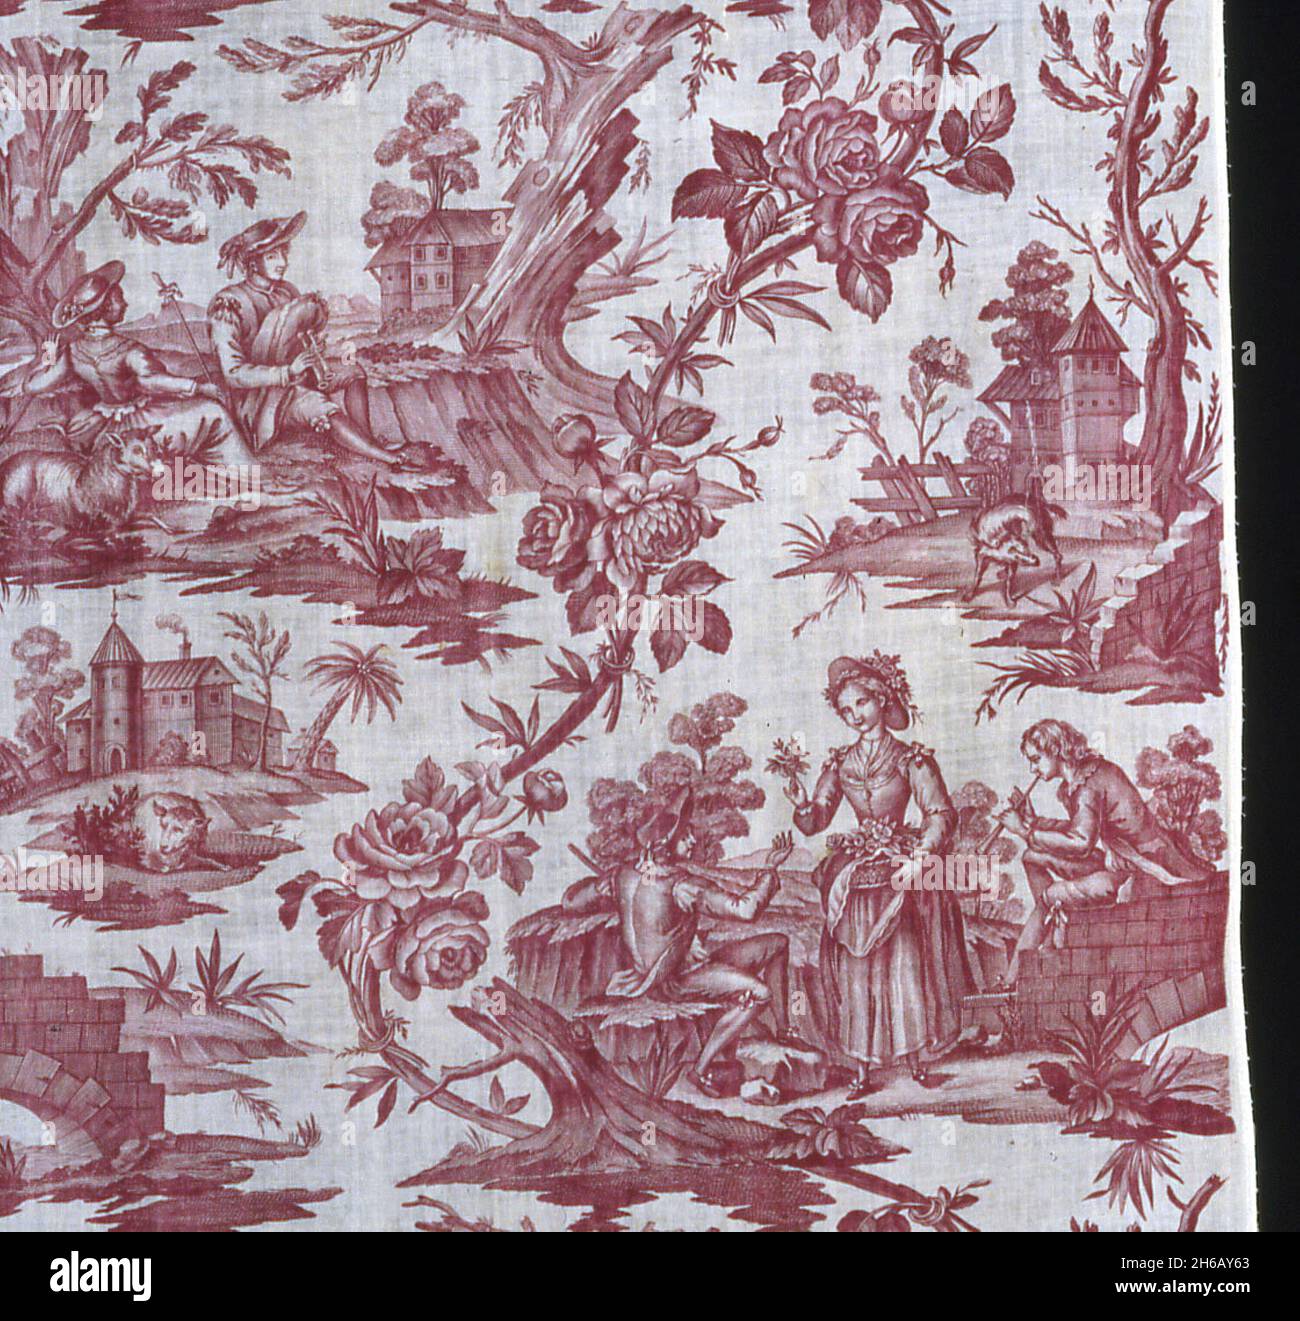 Panel (Furnishing Fabric), France, c. 1785. Floral print with rustic vignettes. Possibly manufactured by Oberkampf Manufactory. Stock Photo